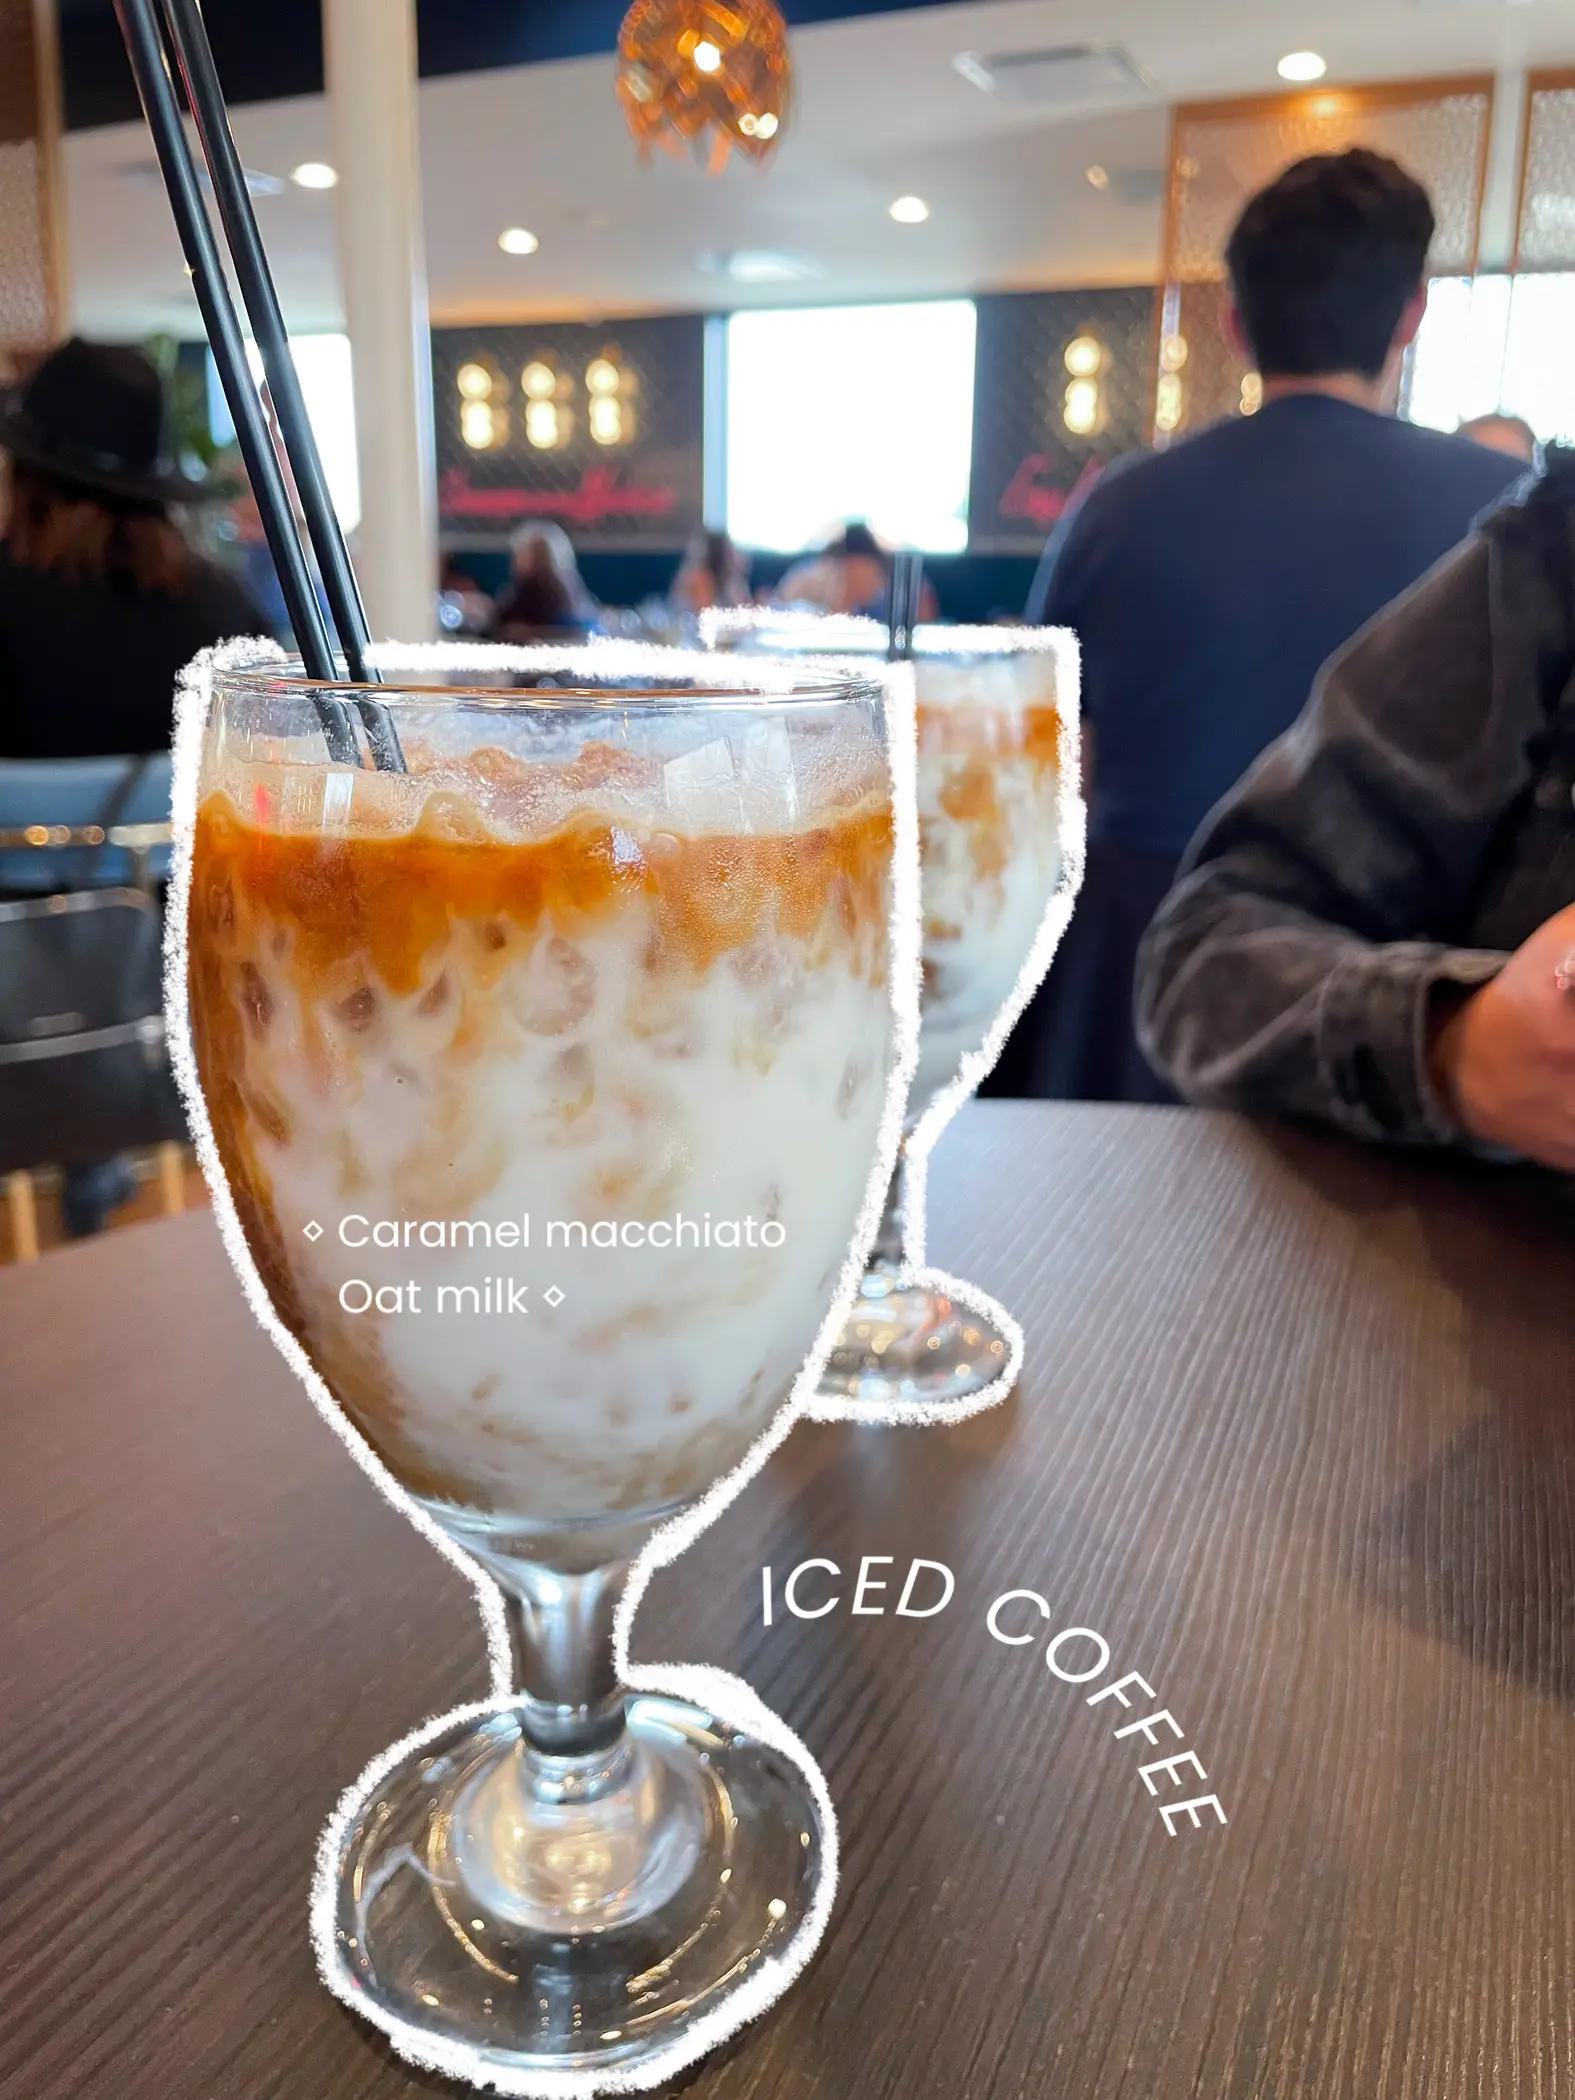  A glass of iced coffee with a spoon in it.